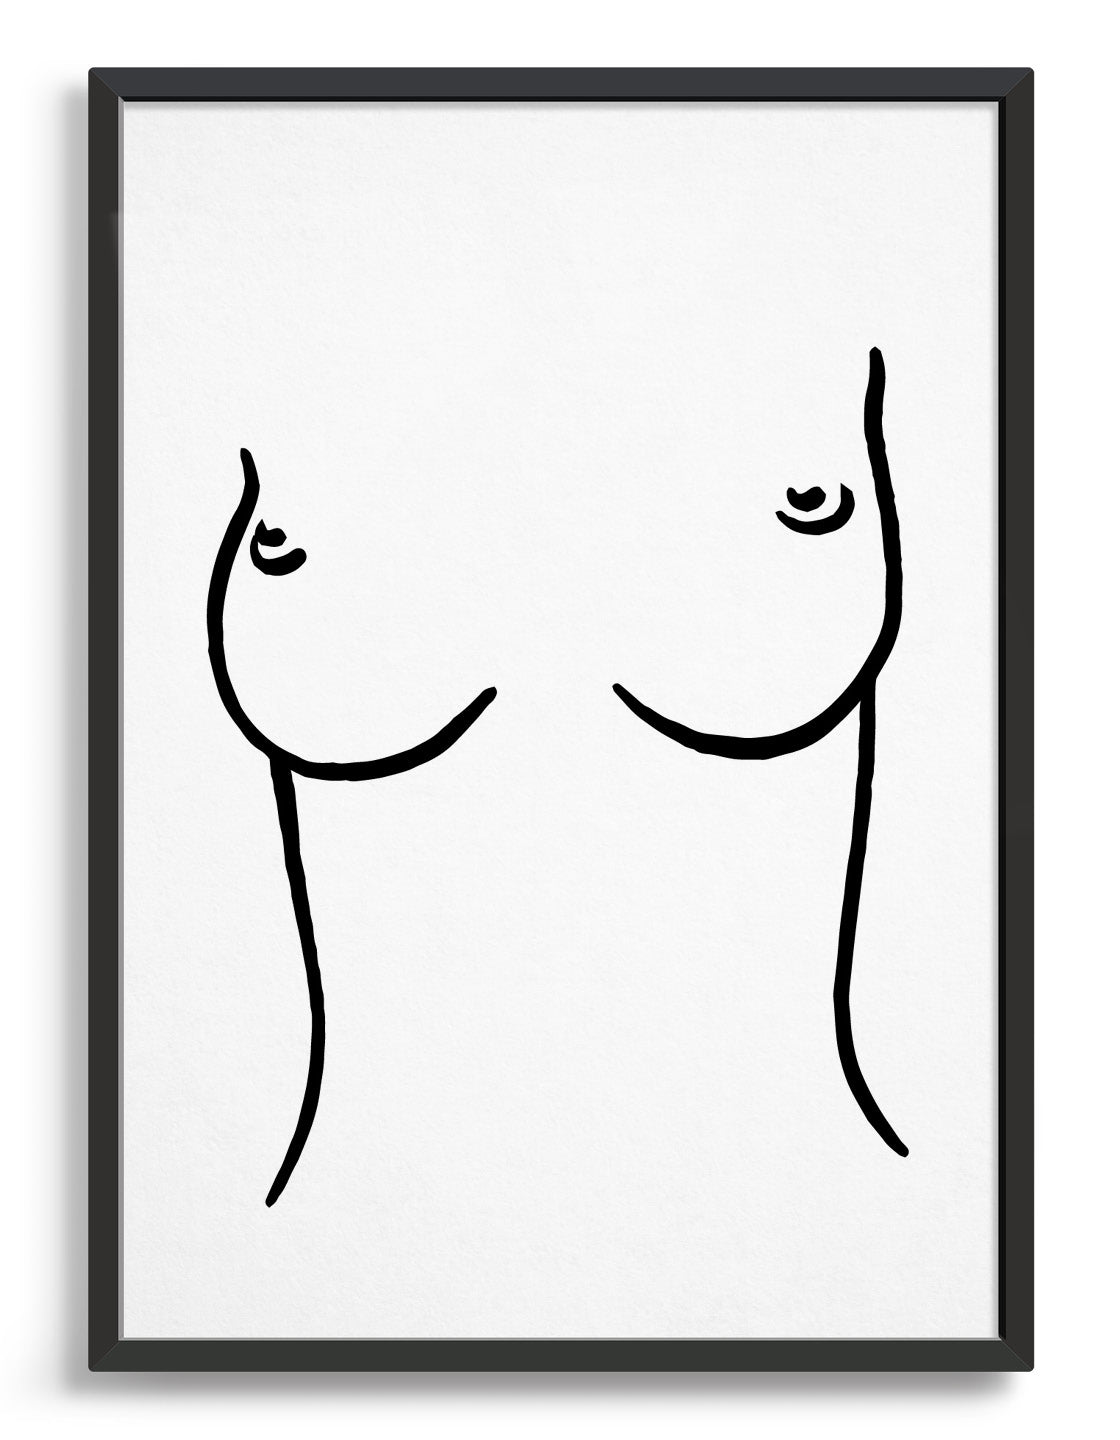 line drawing of a woman's torso and breasts